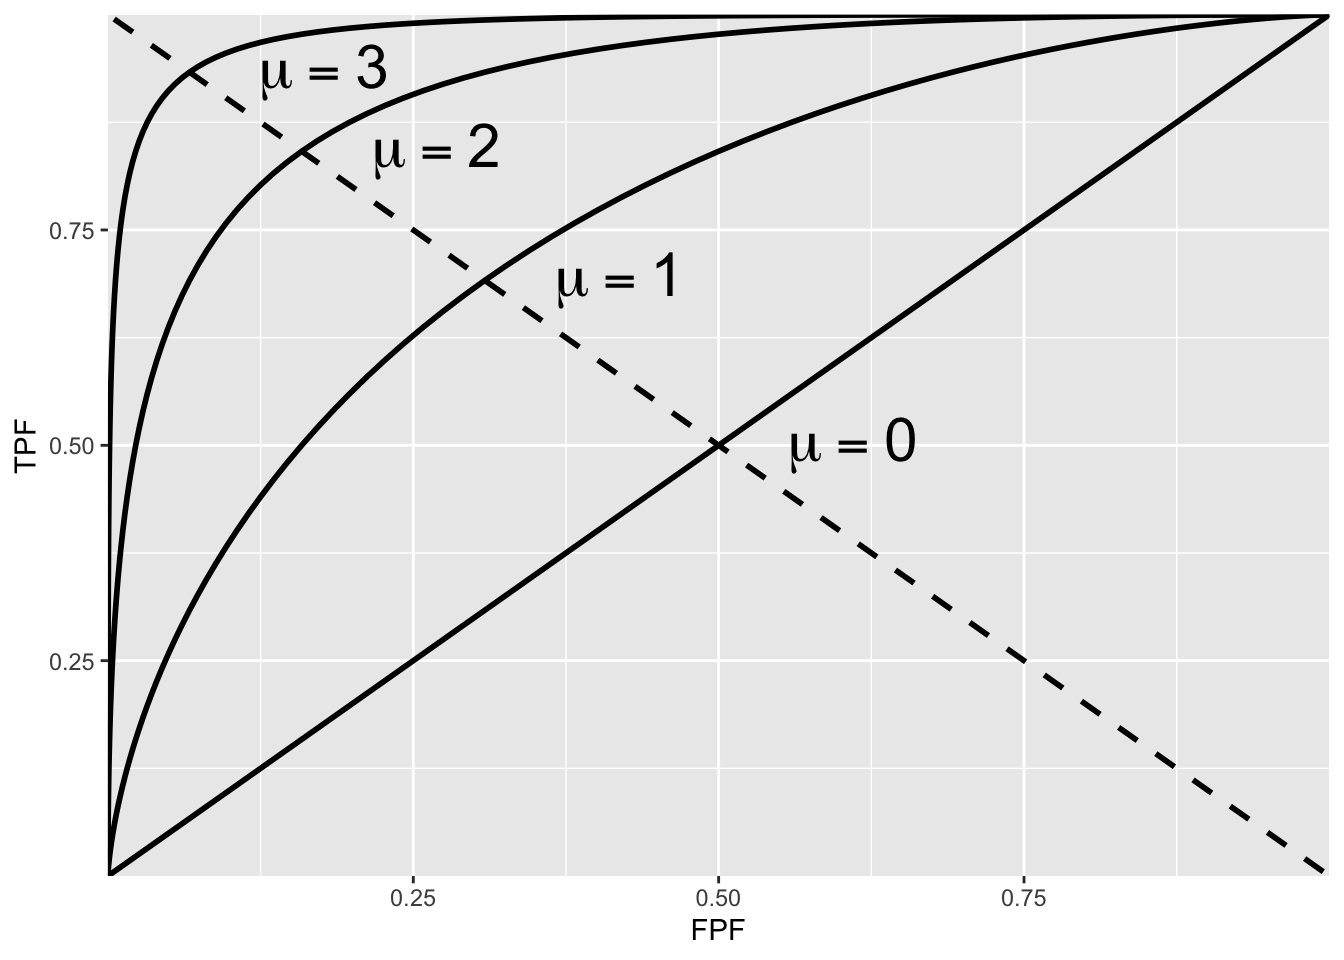 ROC plots predicted by the equal variance binormal model for different values of $\mu$. As $\mu$ increases the intersection of the curve with the negative diagonal moves closer to the ideal operating point, (0,1) at which sensitivity and specificity are both equal to unity.